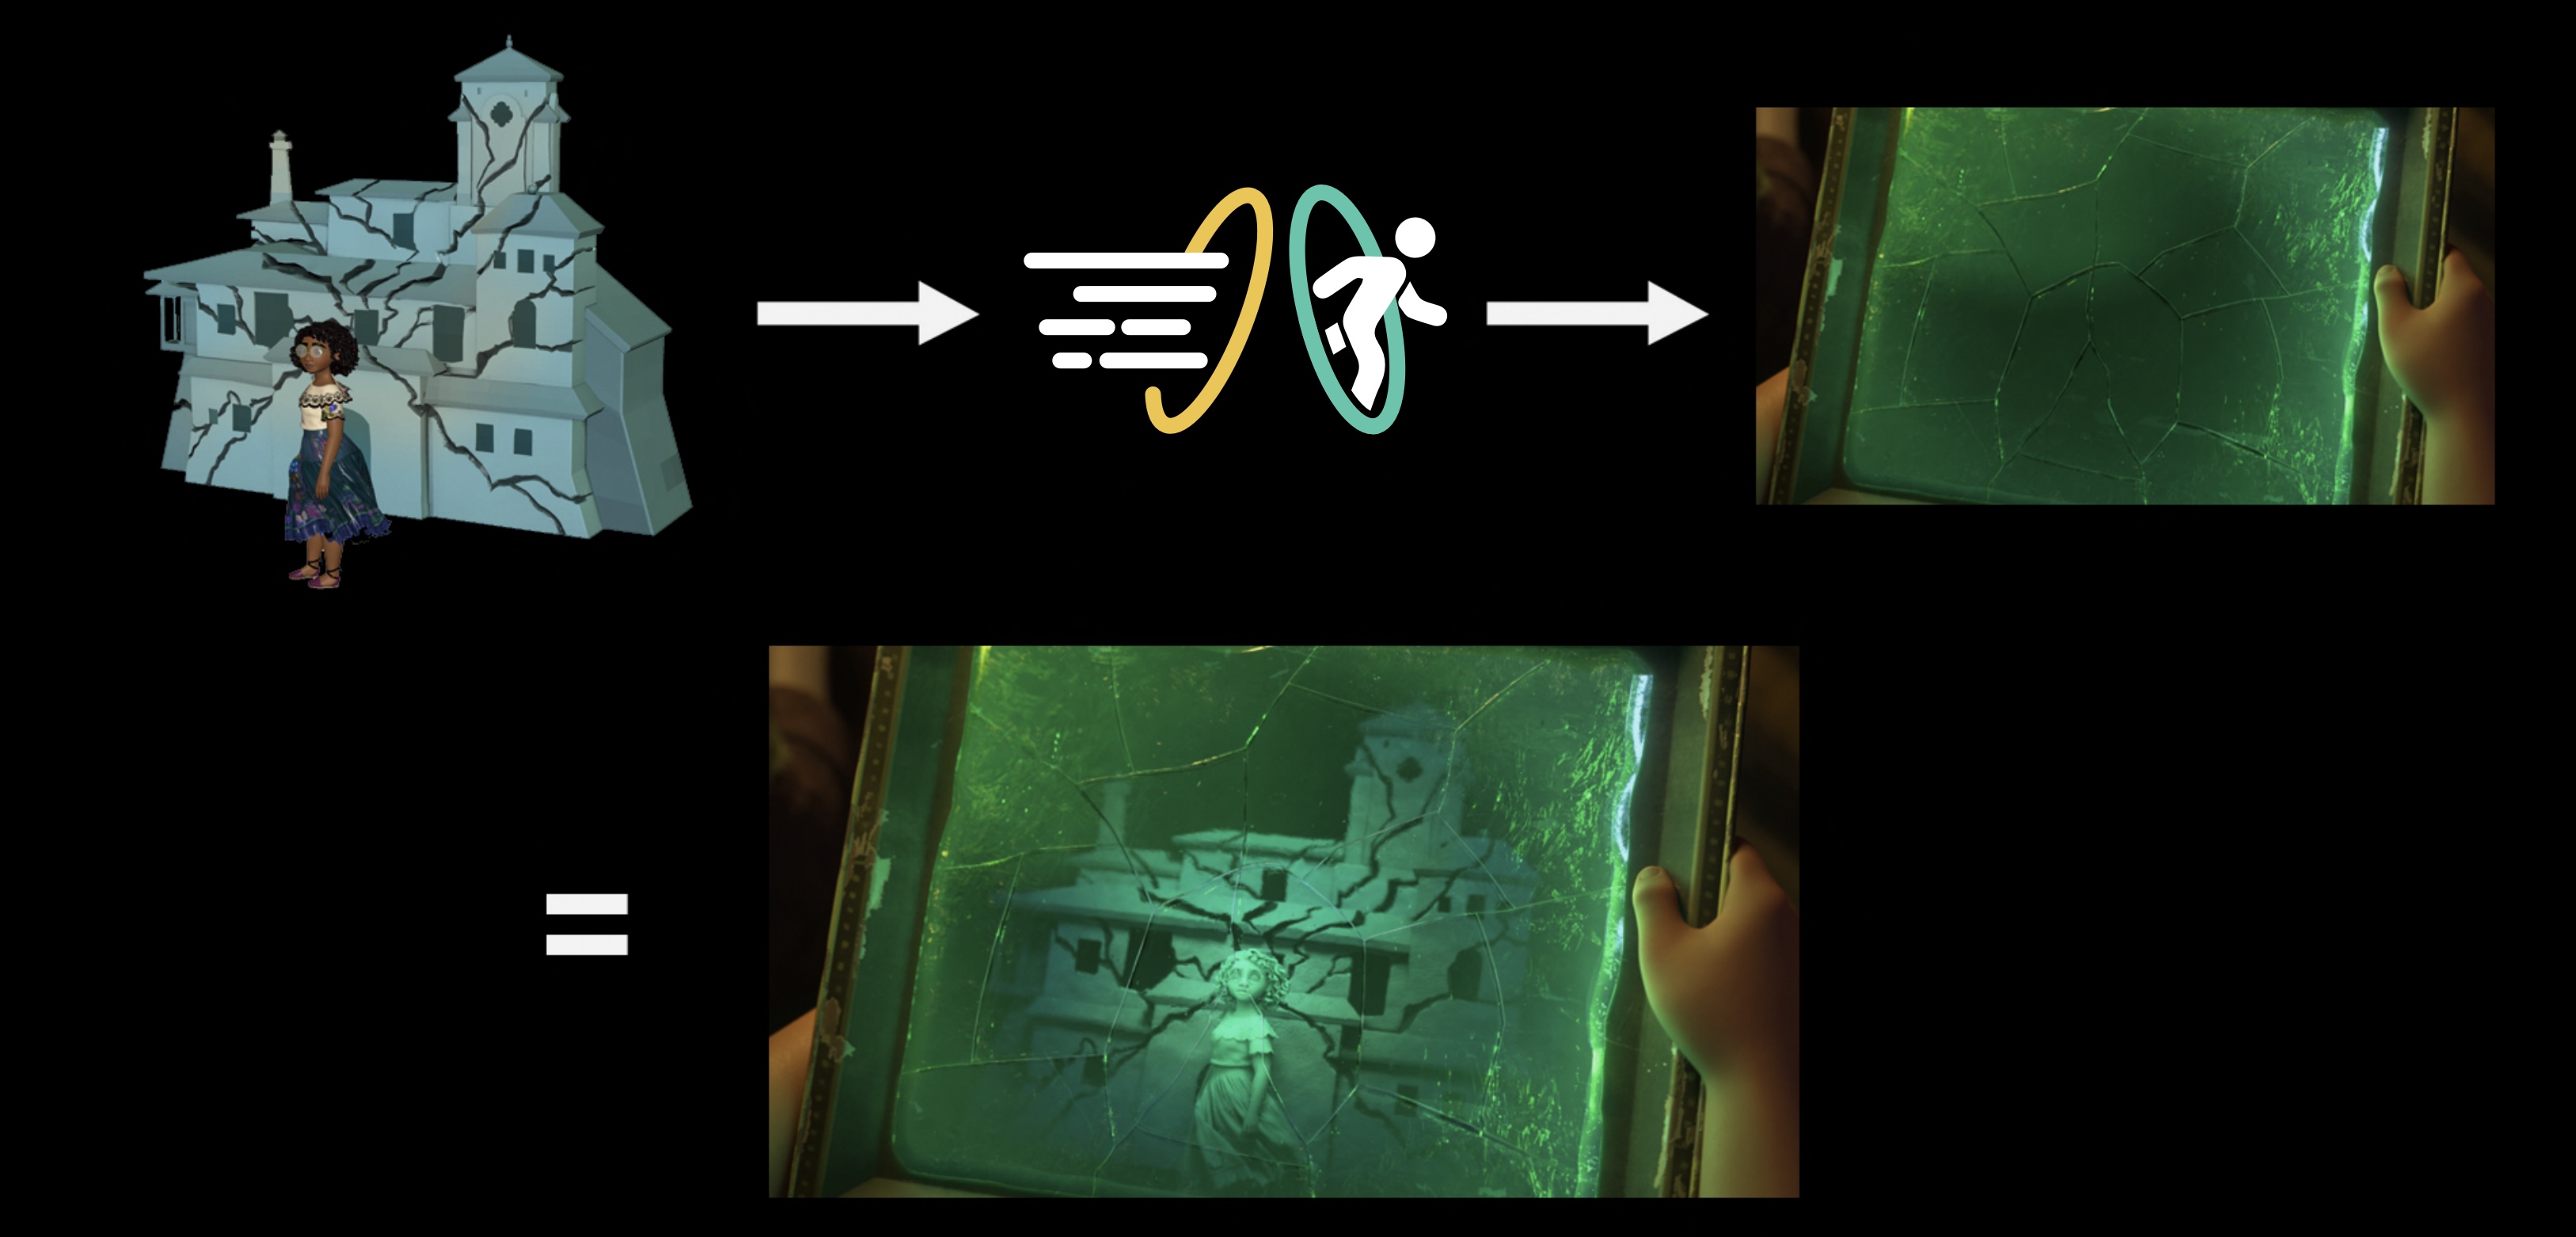 An alternate, higher-res version of Figure 1 from the paper: creating the holographic look for Bruno’s visions required close collaboration between visdev, look, lighting, and technology. The final look for Bruno's visions required a new, bespoke teleportation shader developed in Disney's Hyperion Renderer